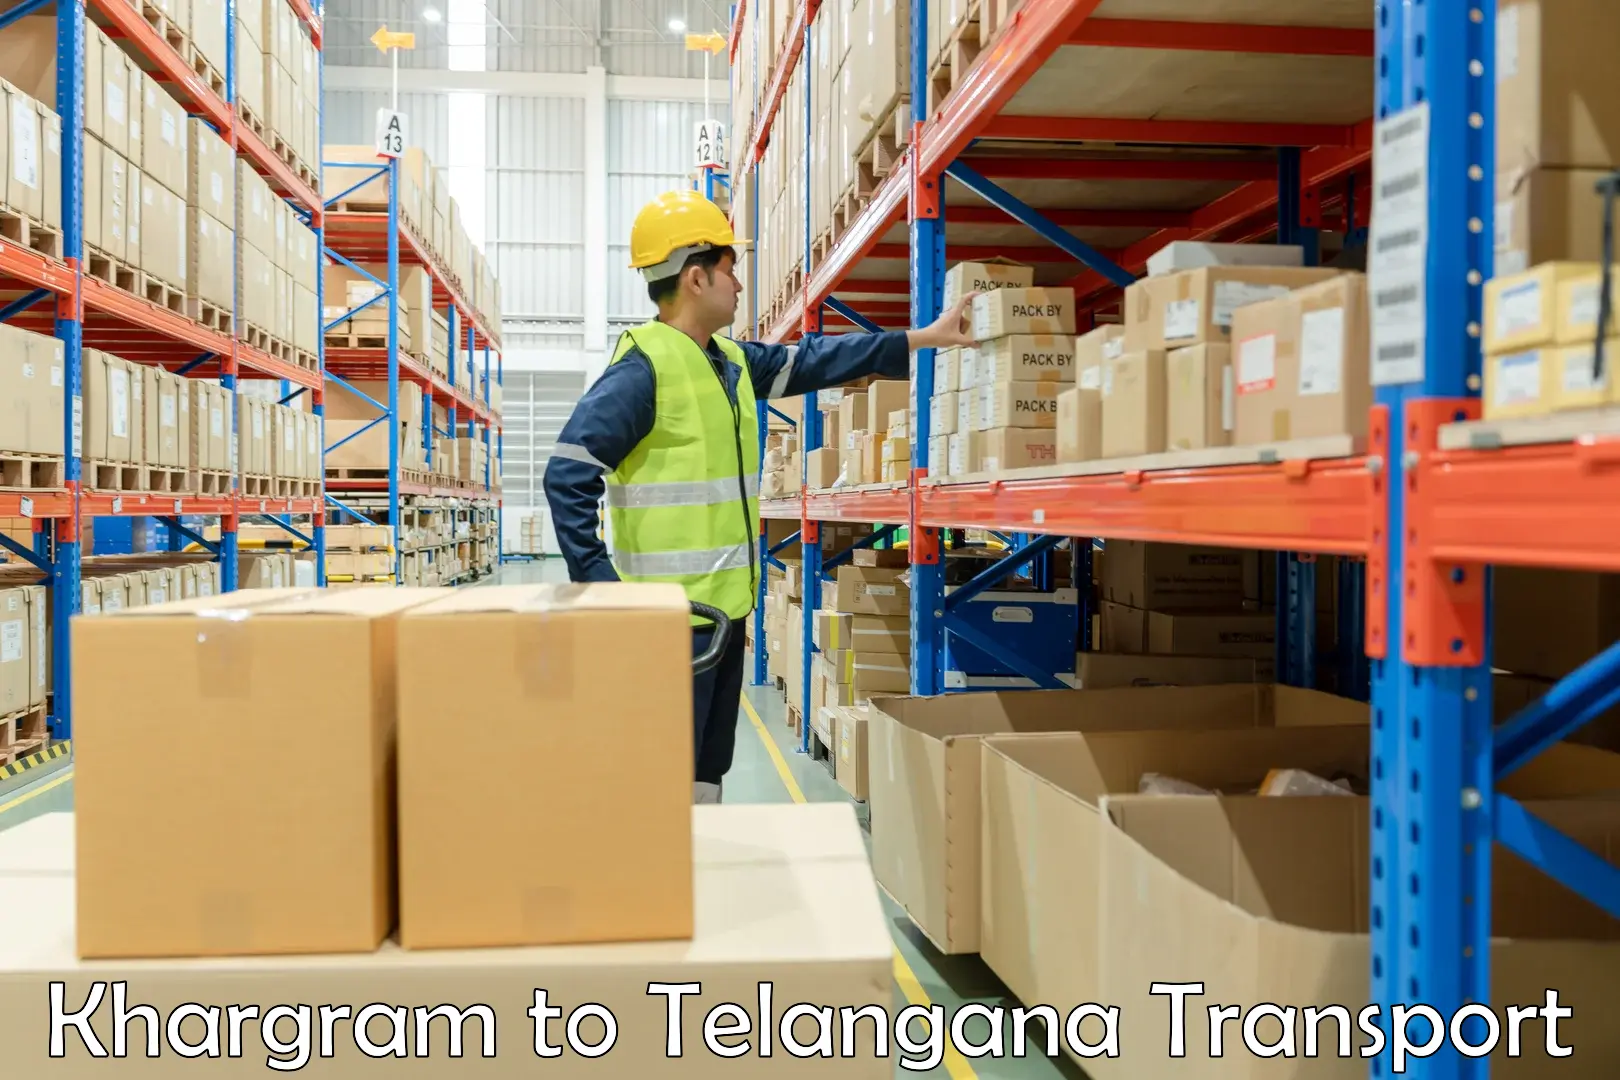 Shipping services Khargram to Sultanabad